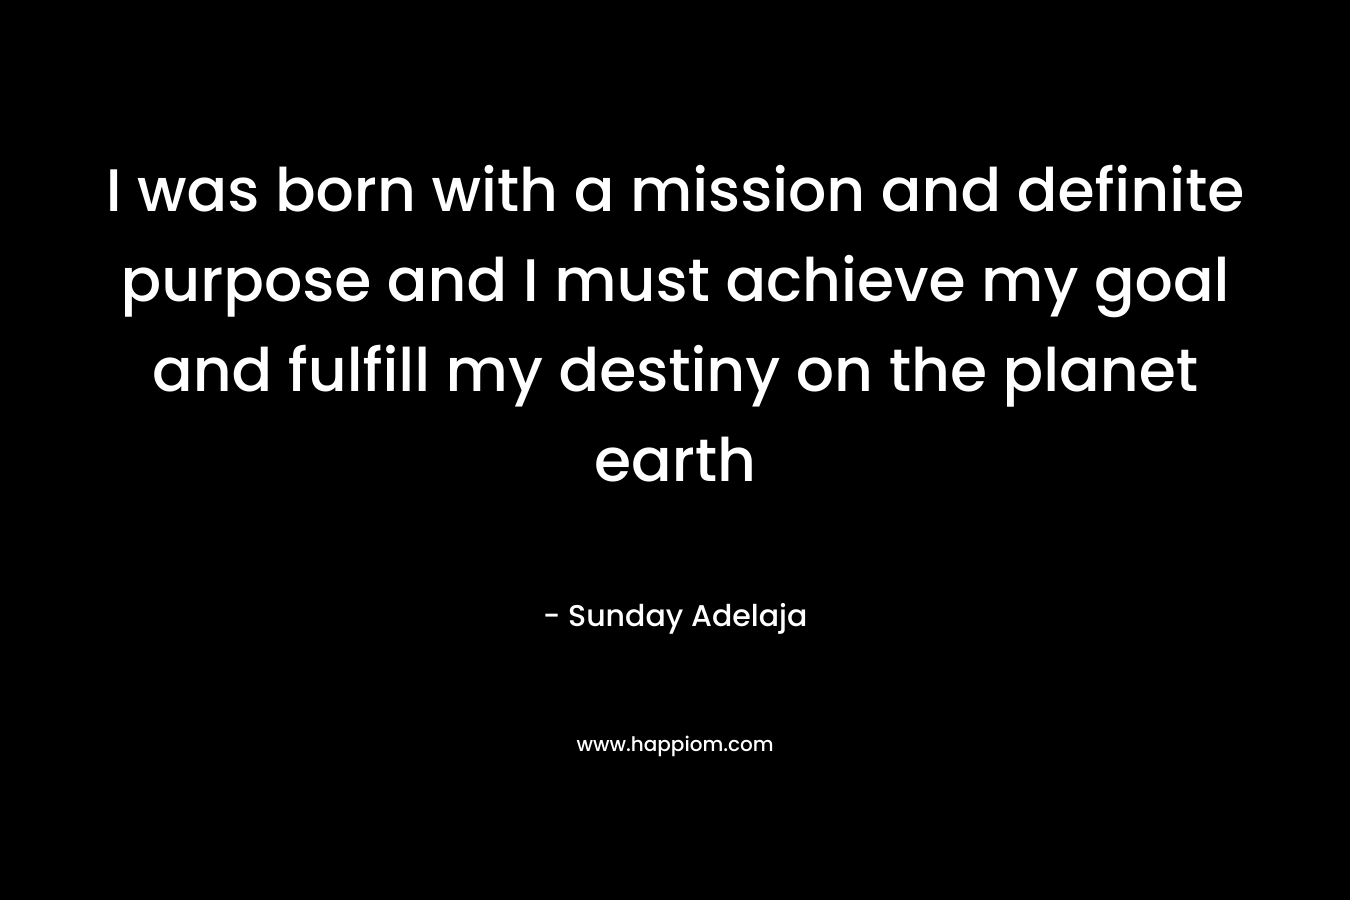 I was born with a mission and definite purpose and I must achieve my goal and fulfill my destiny on the planet earth